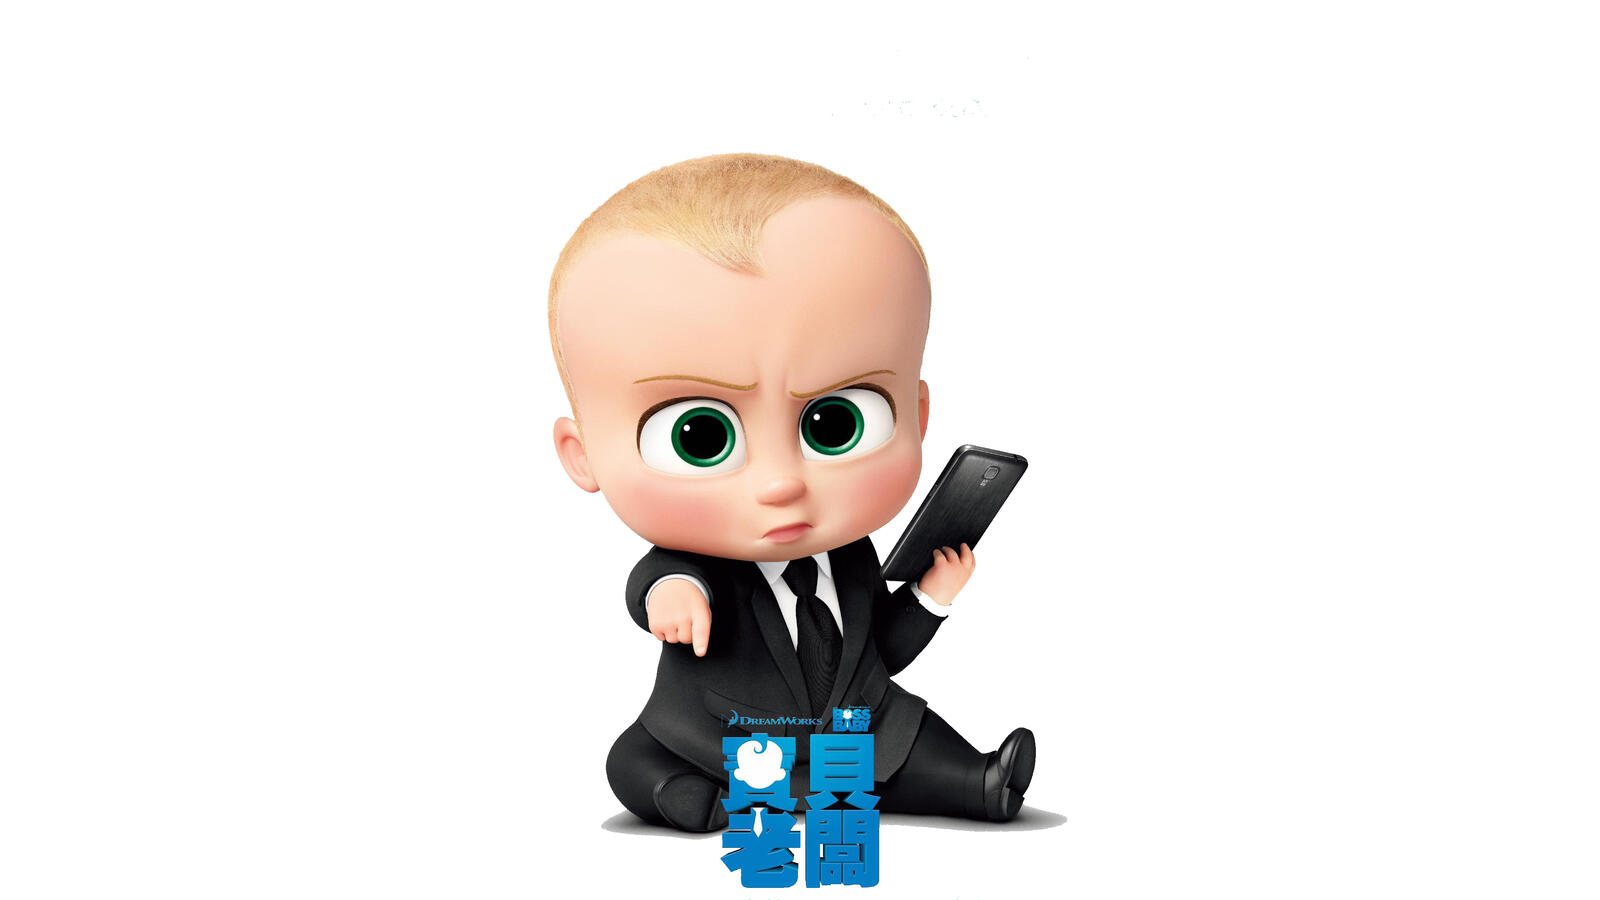 Wallpapers the boss baby animated movies 2017 Movies on the desktop